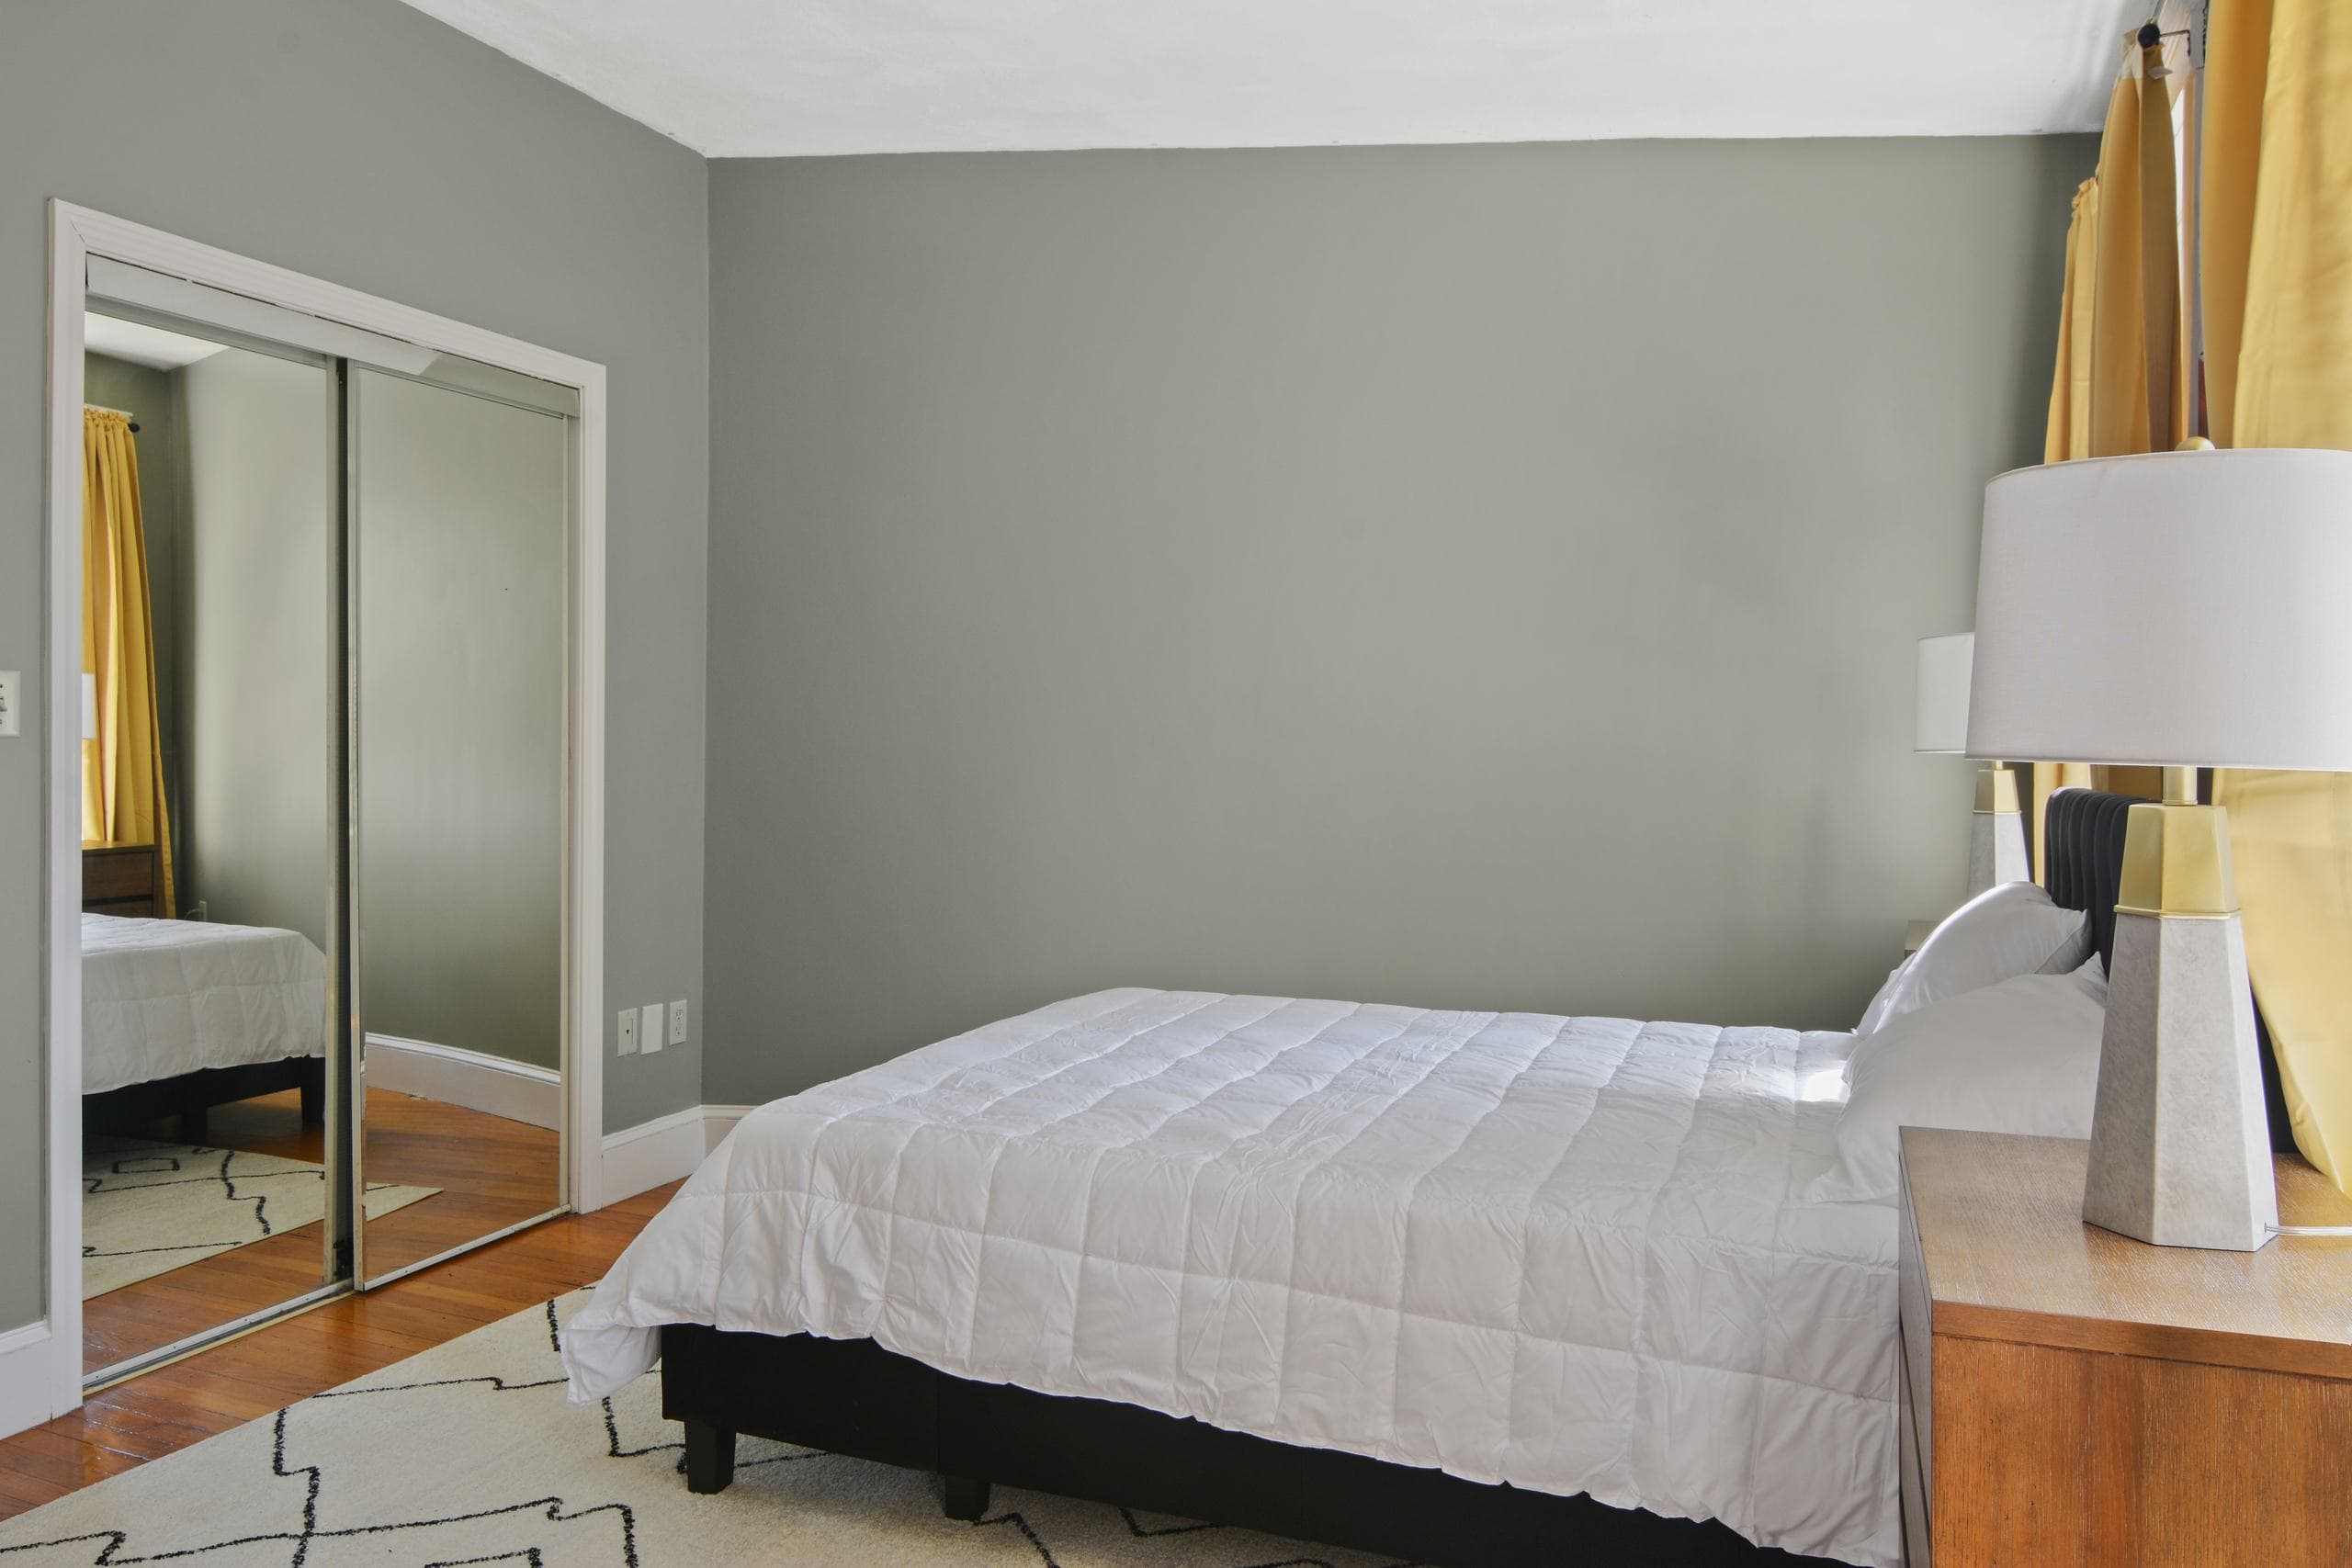 Photo 2 of #1683: Queen Bedroom A at June Homes